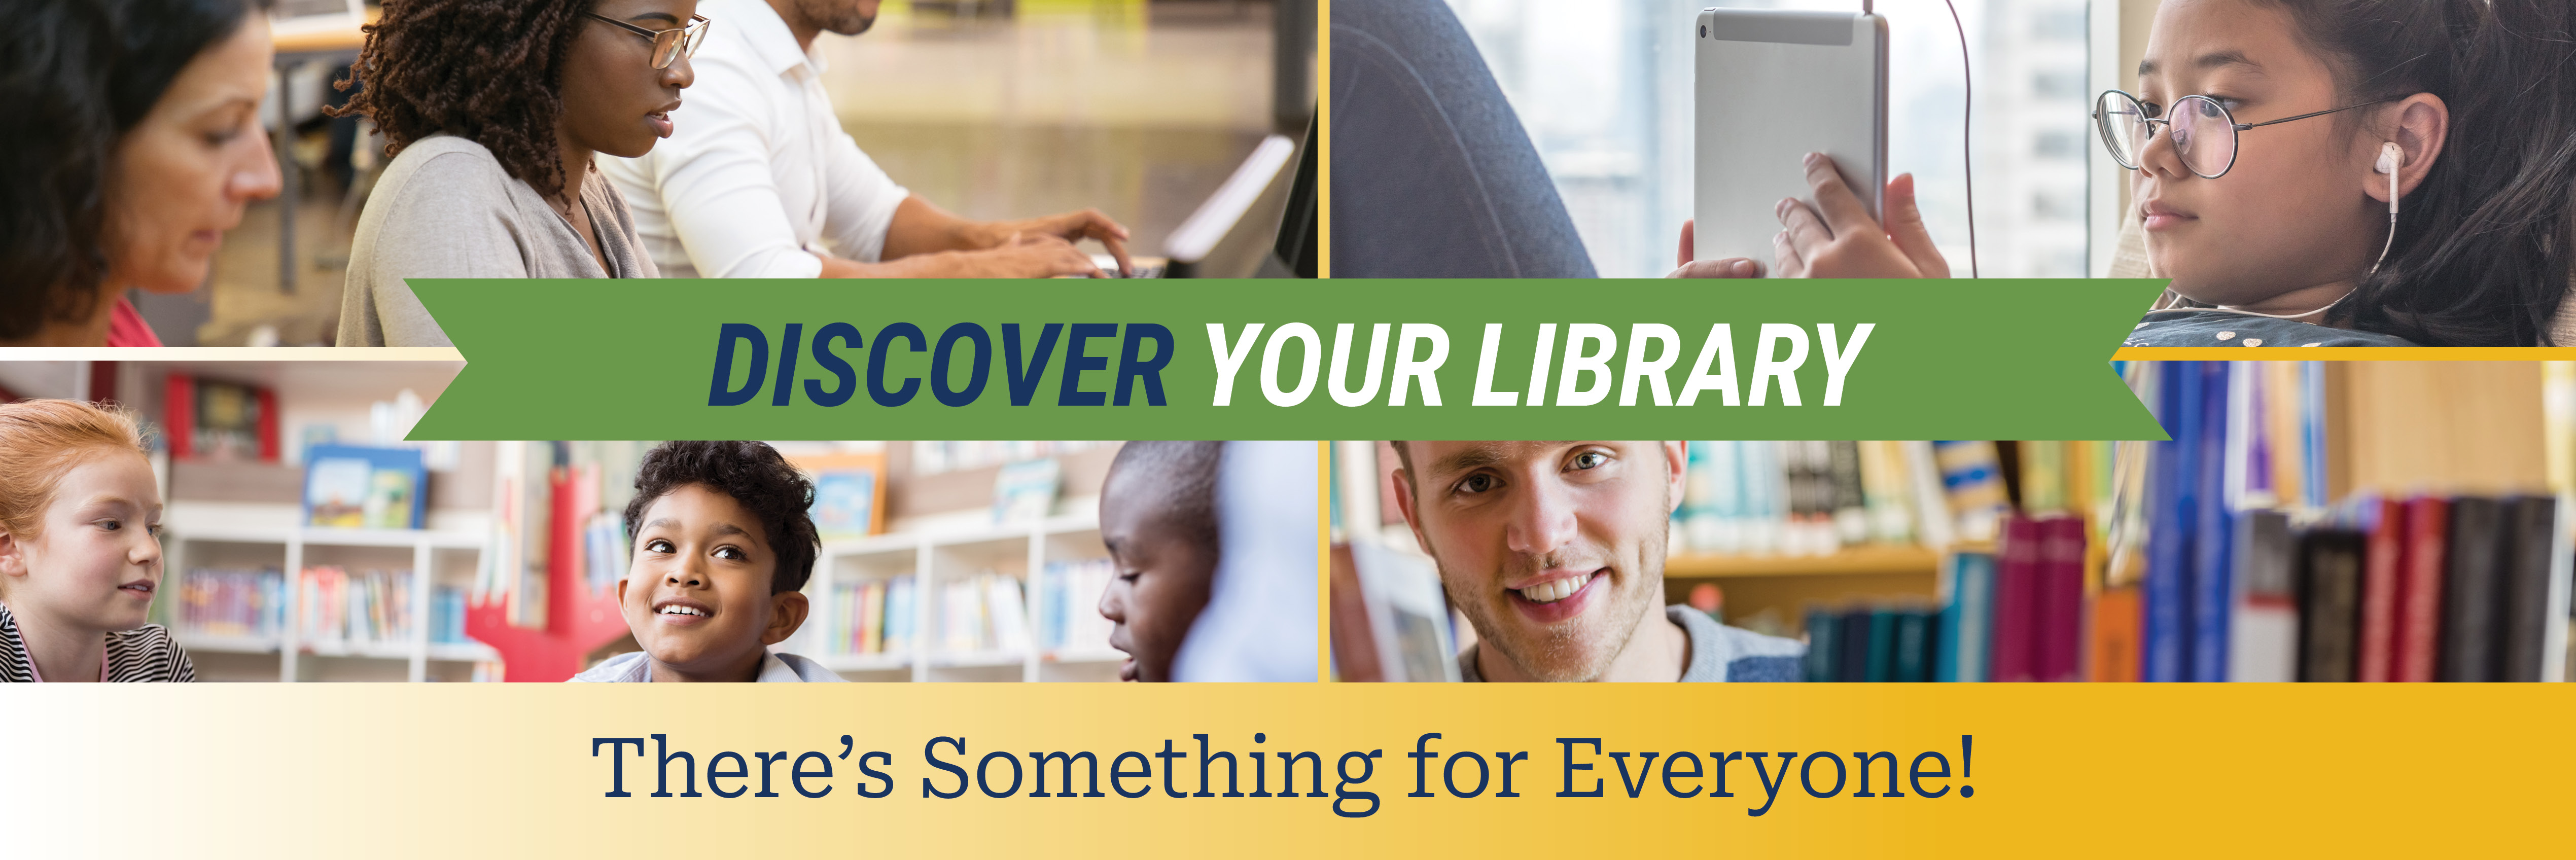 Discover Your Library 